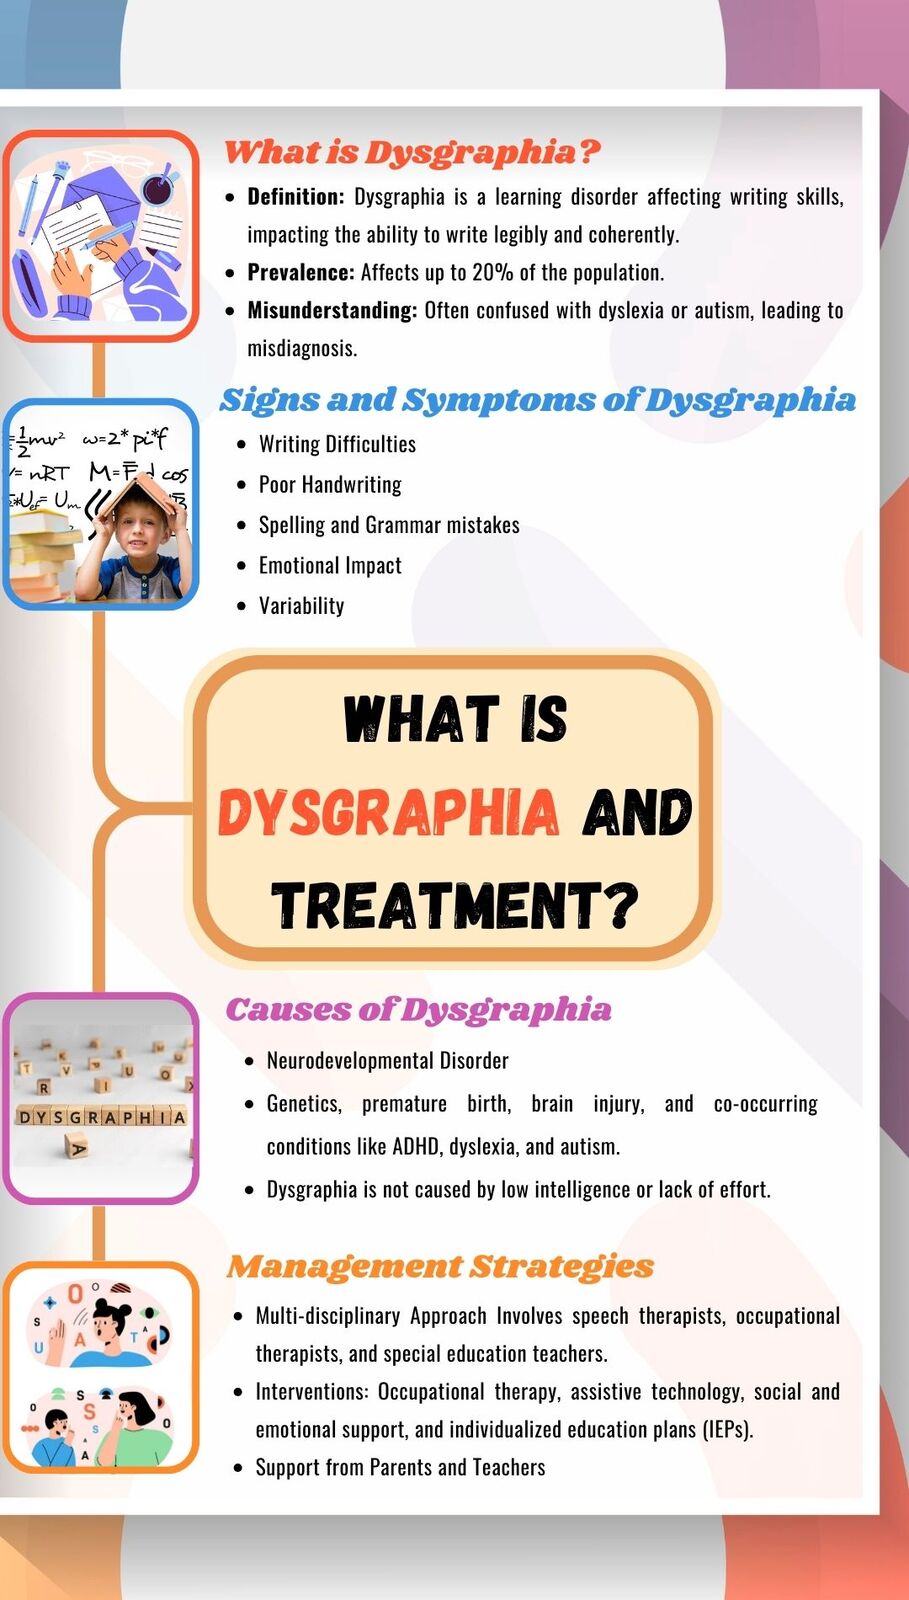 What is Dysgraphia and Treatment?